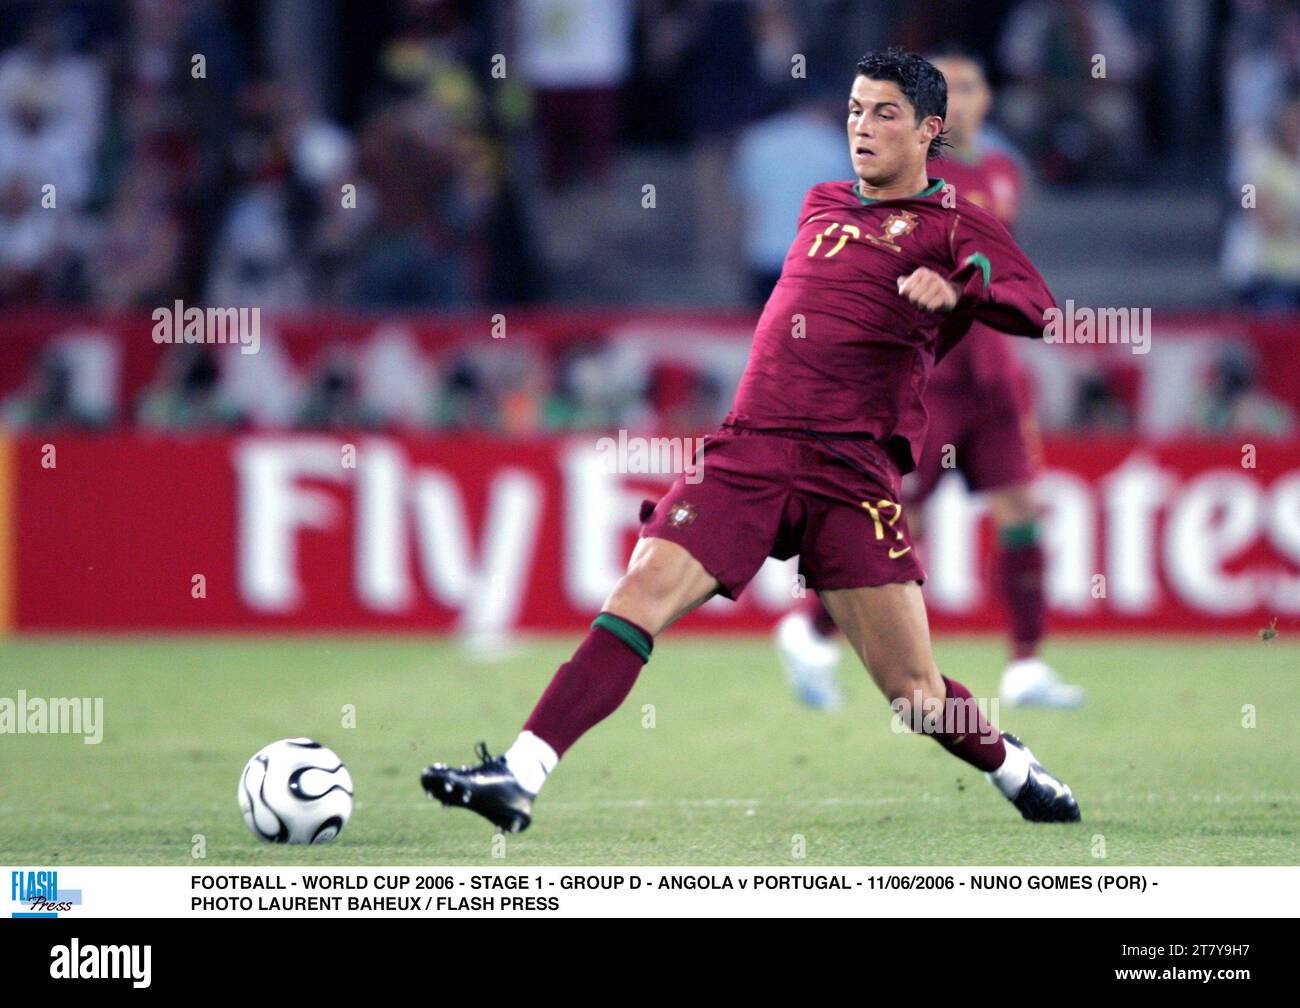 FOOTBALL - WORLD CUP 2006 - STAGE 1 - GROUP D - ANGOLA v PORTUGAL - 11/06/2006 - NUNO GOMES (POR) - PHOTO LAURENT BAHEUX / FLASH PRESS Stock Photo